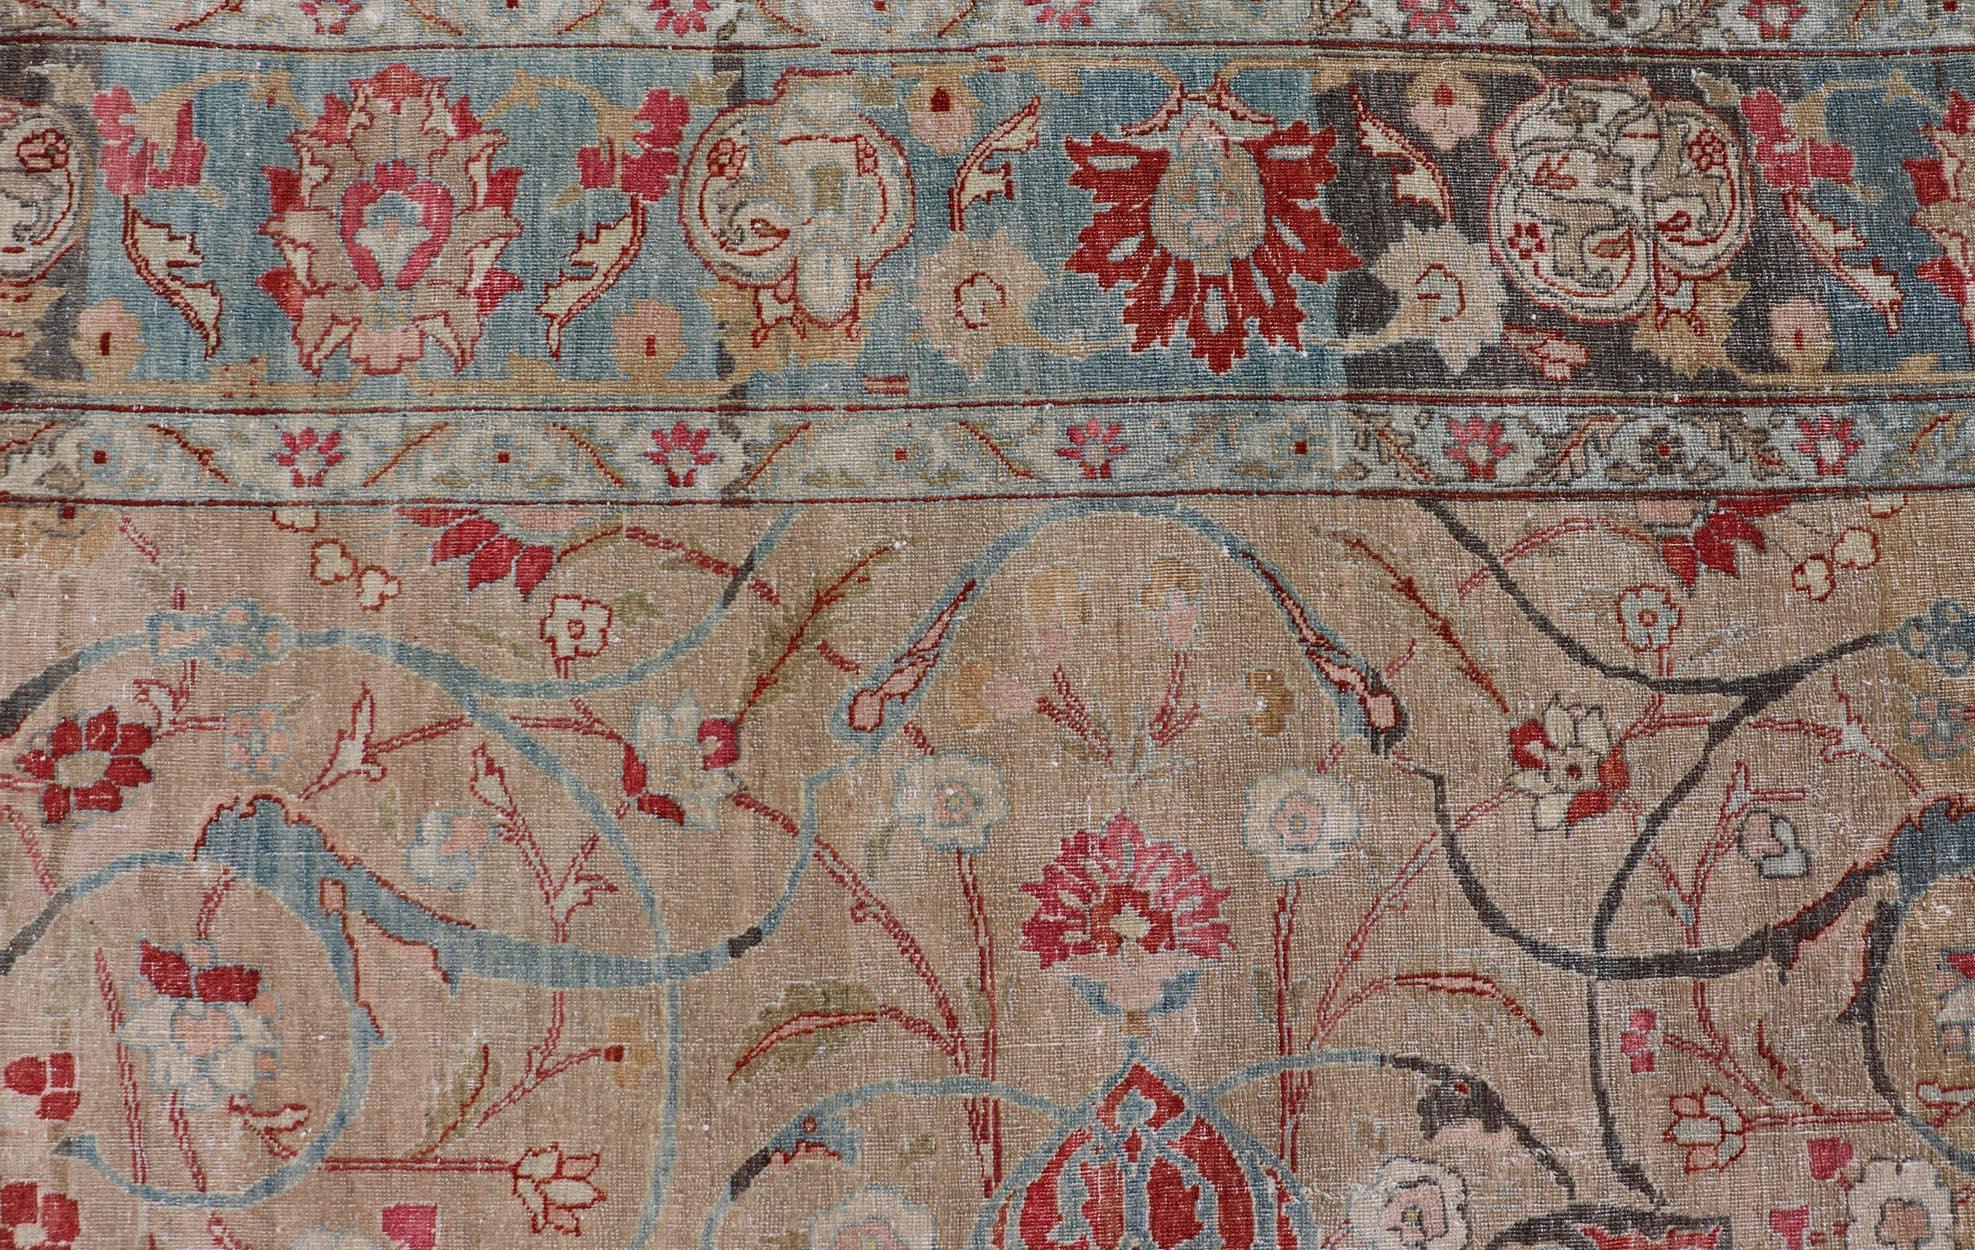 Antique Persian Tabriz Rug with Floral Medallion Design in Tan, Red, and Blue. Keivan Woven Arts / rug EN-14861, country of origin / type: Iran / Tabriz, circa 1920 Floral Medallion Design in Tan, Red, and Blue. 
Measures: 8'4 x 11'9 
This sublime